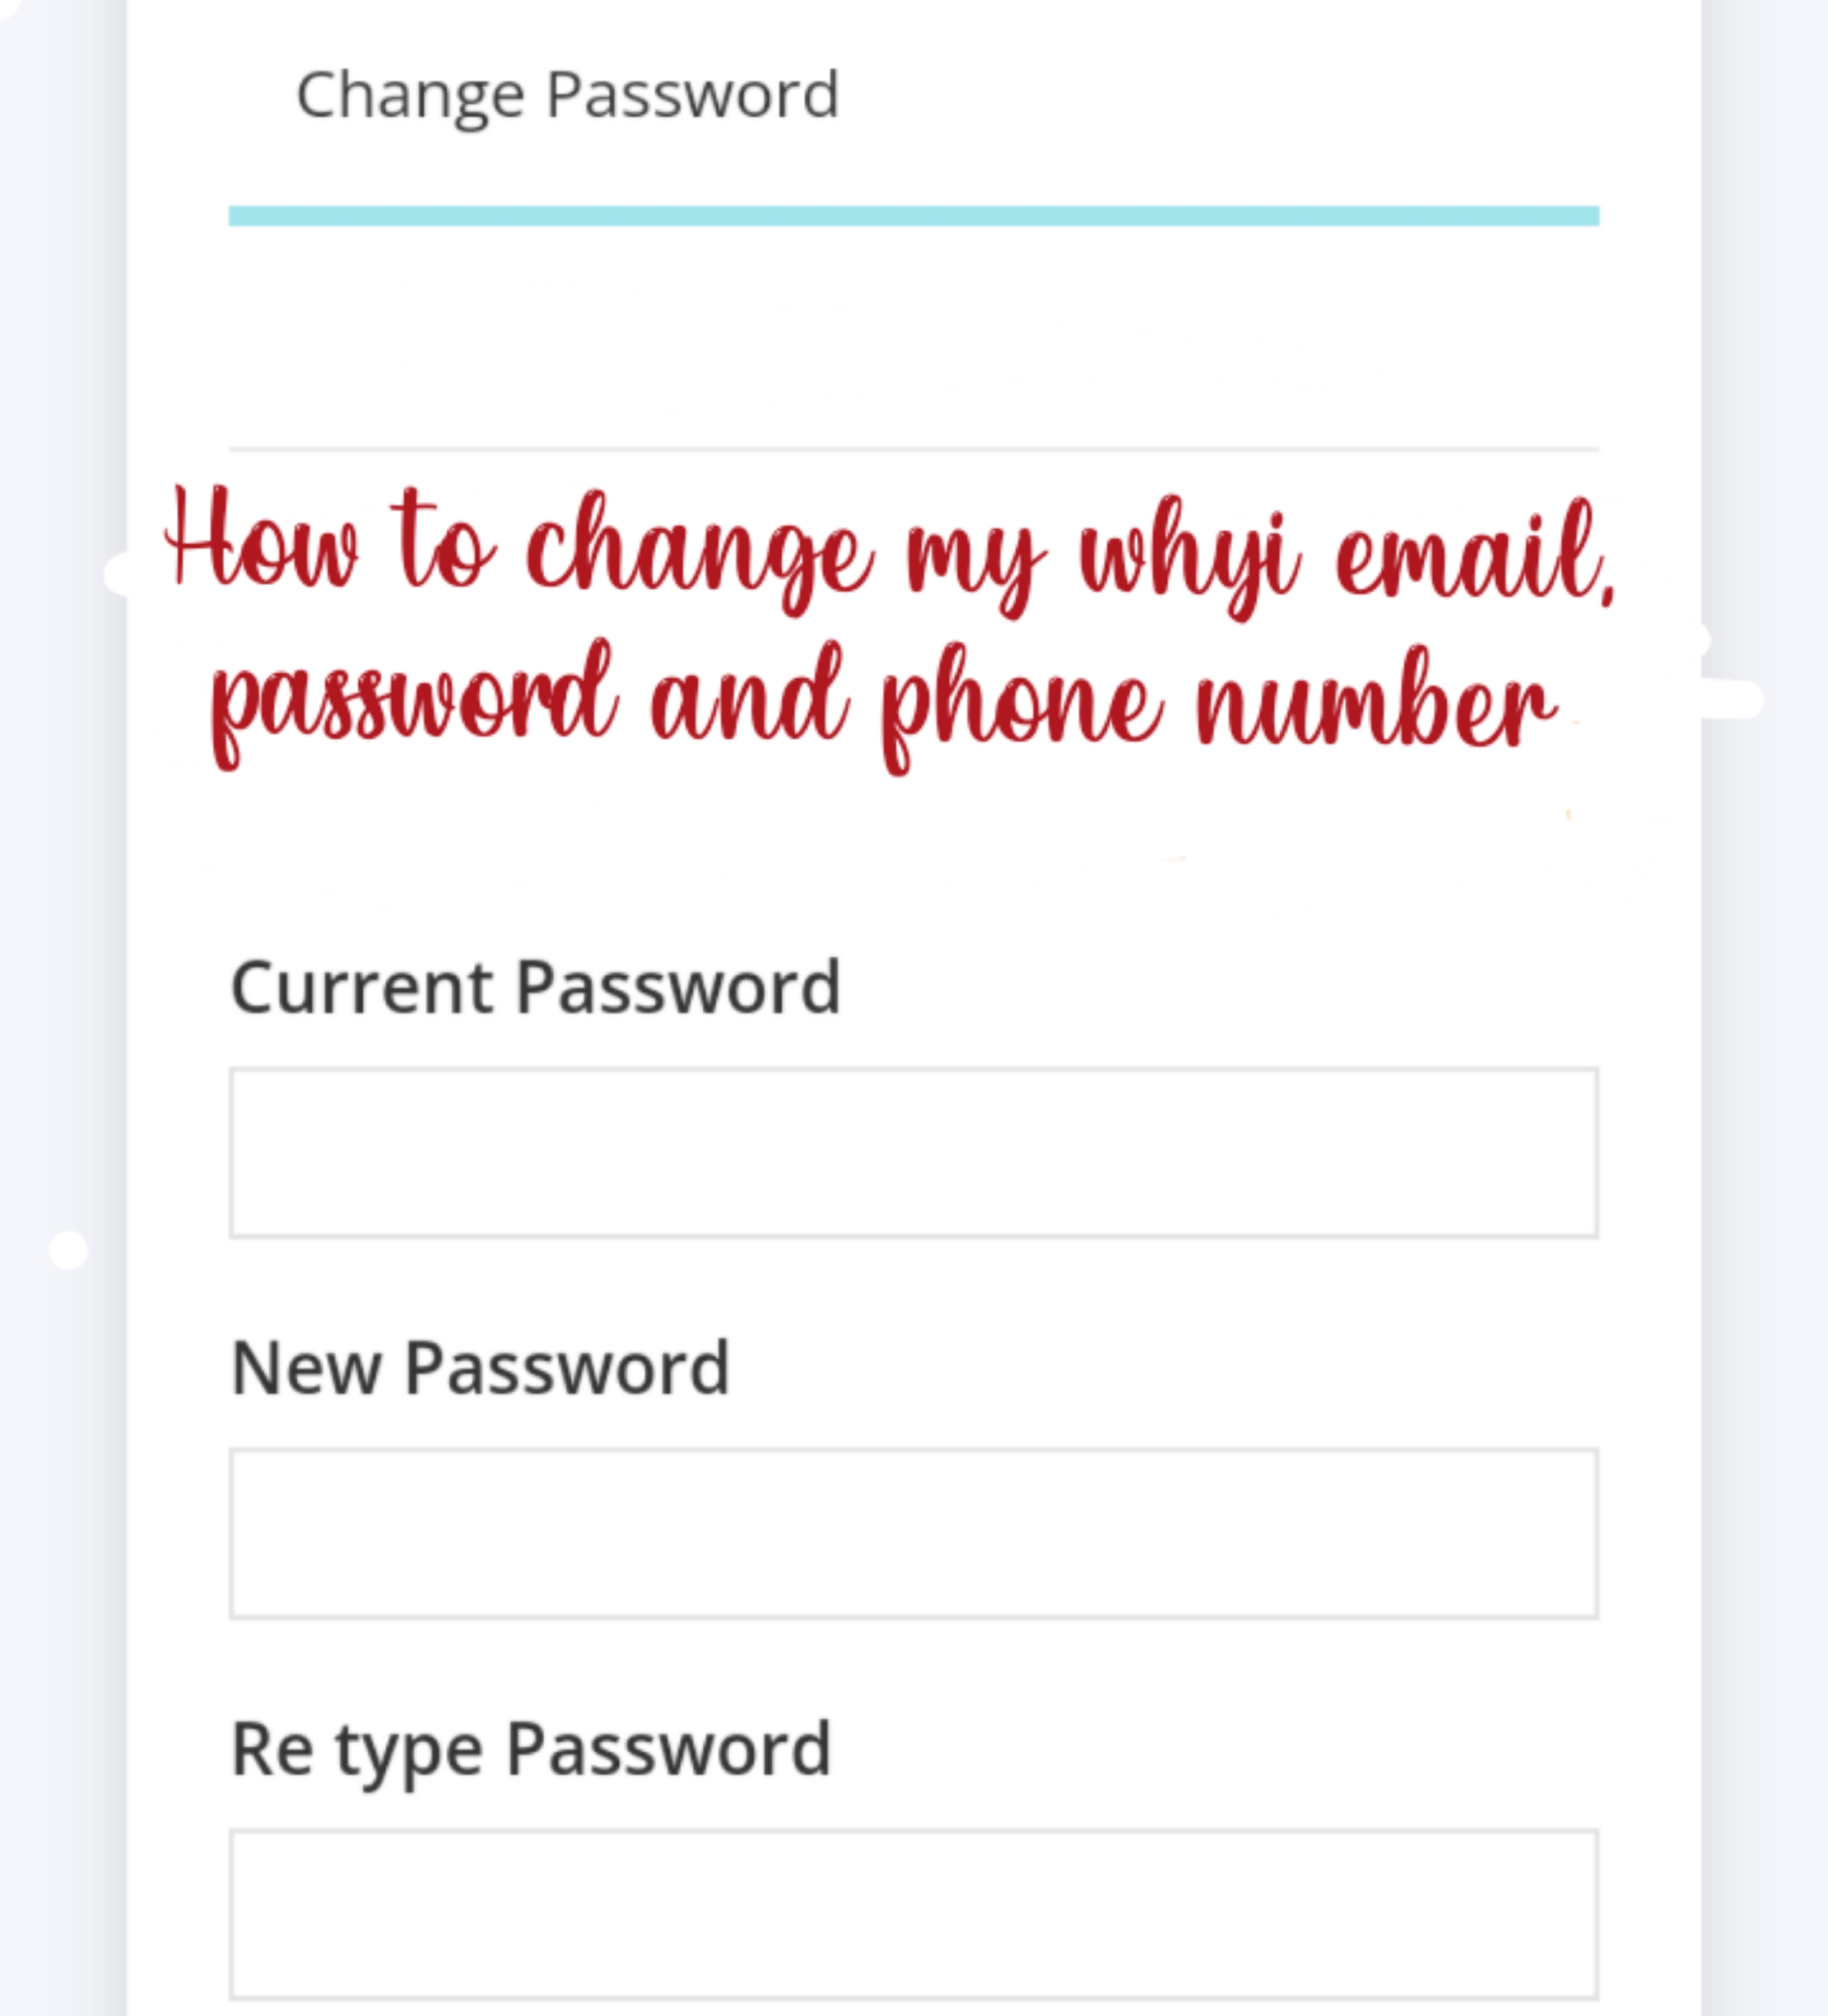 How to change my Whyi email, password and phone number